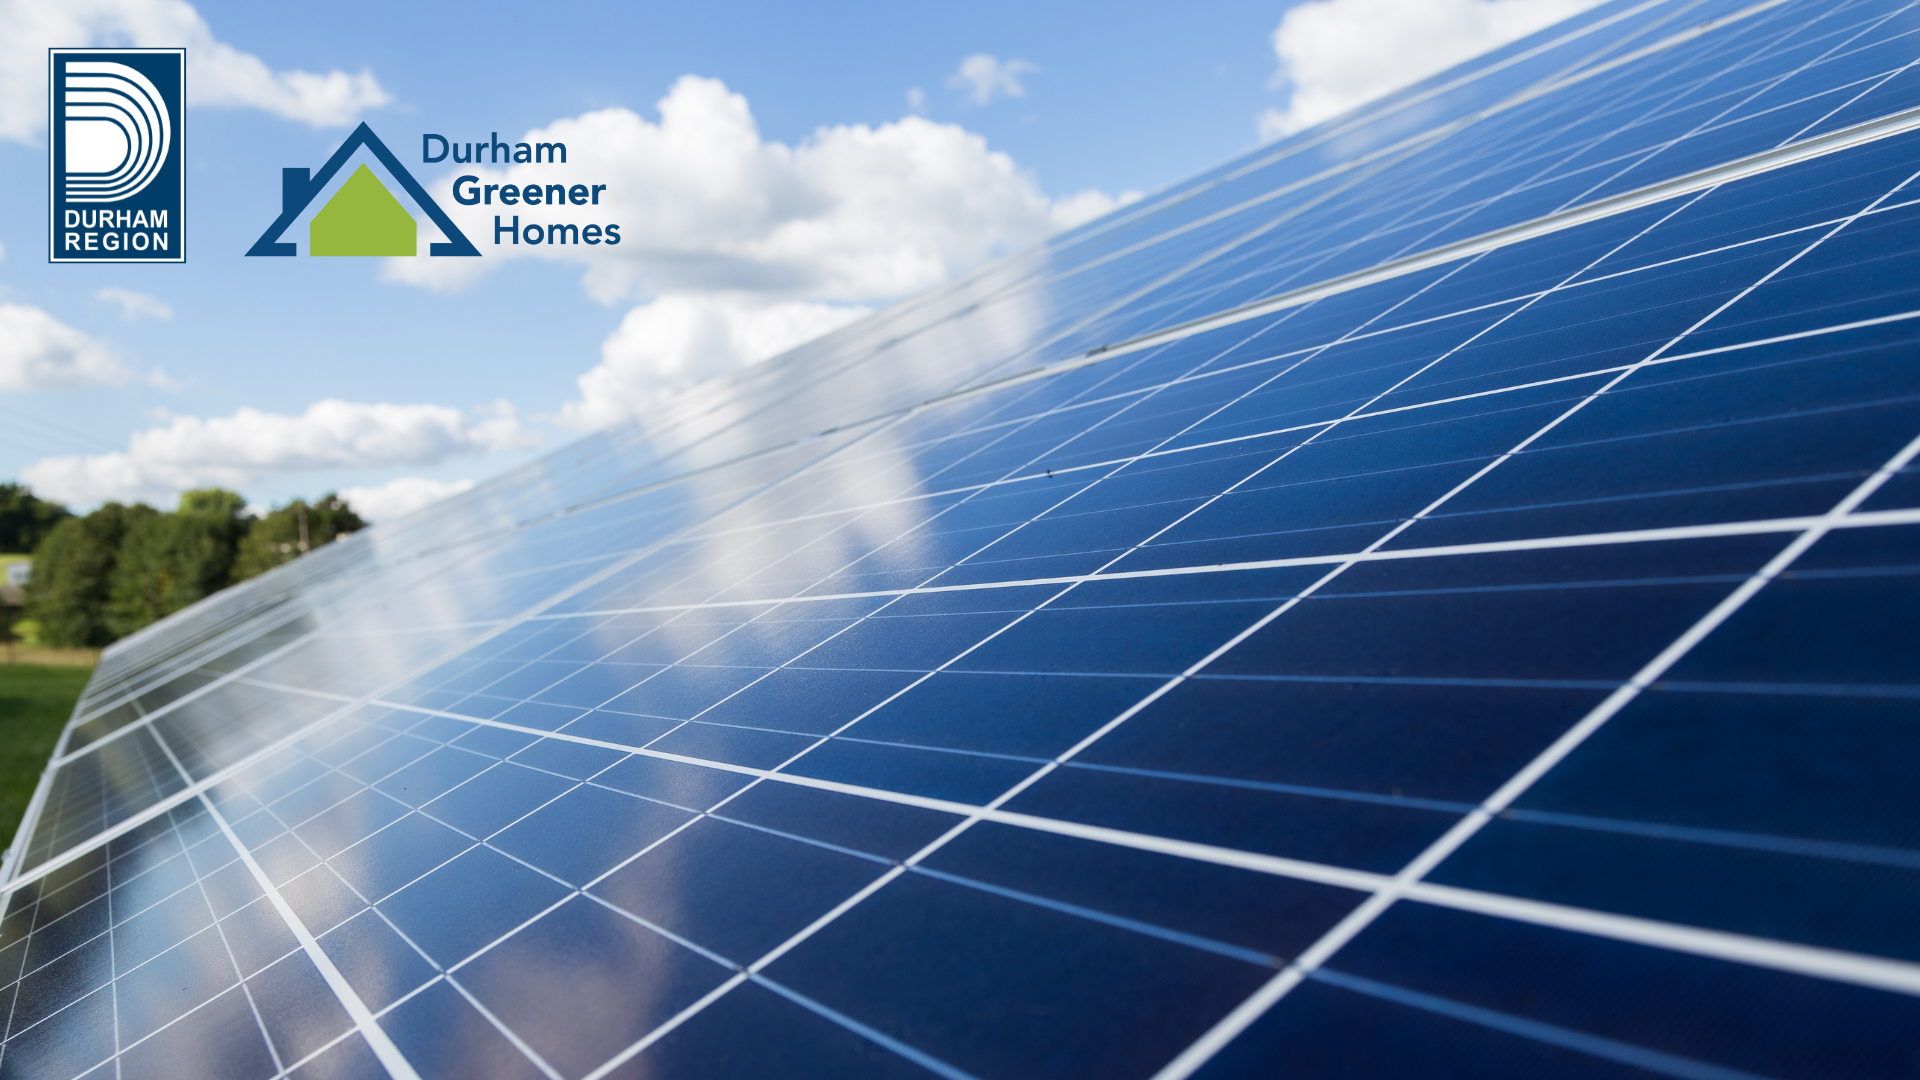 Solar panels set against a blue sky. The Durham Region and Durham Greener Homes logos are in the top left corner.